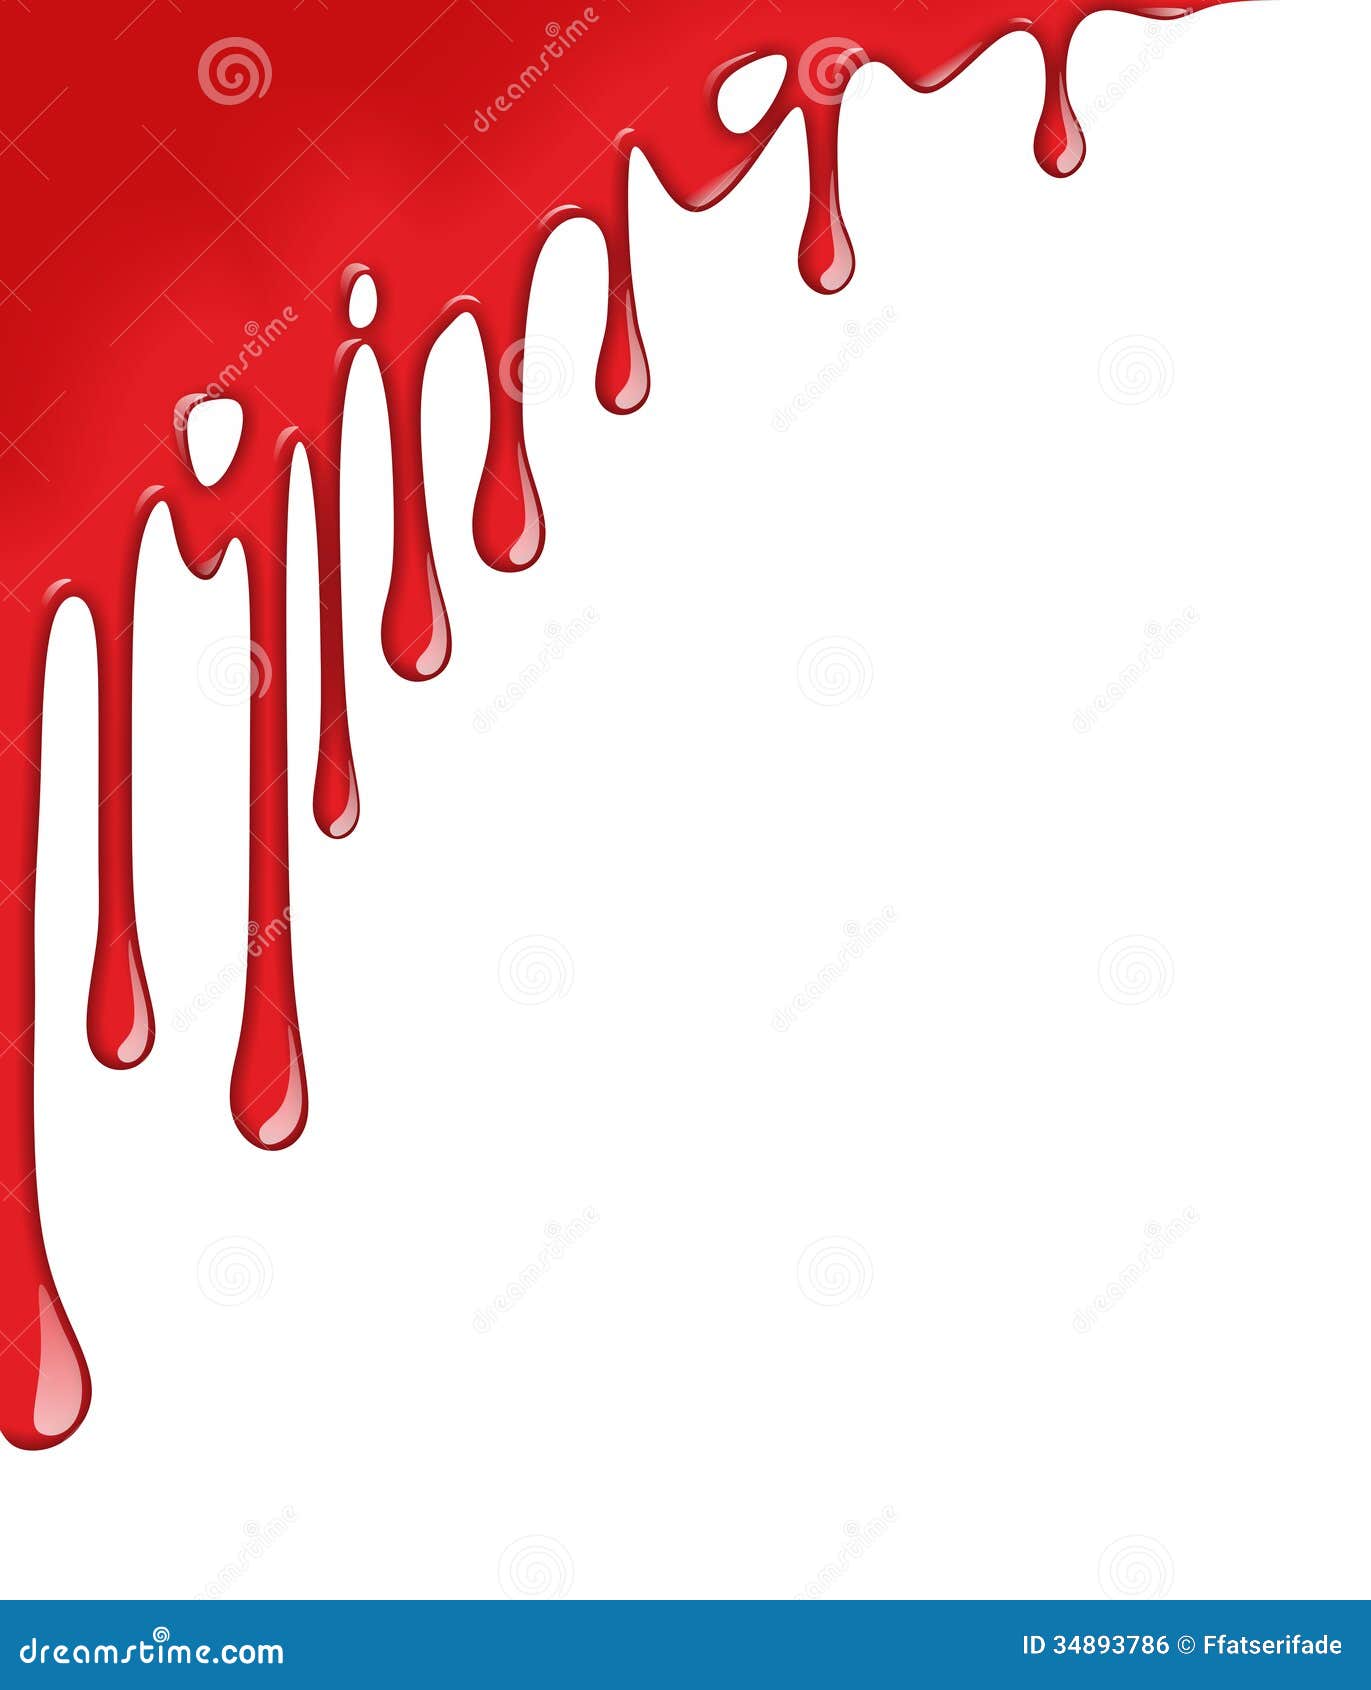 dripping blood clipart border free - photo #21